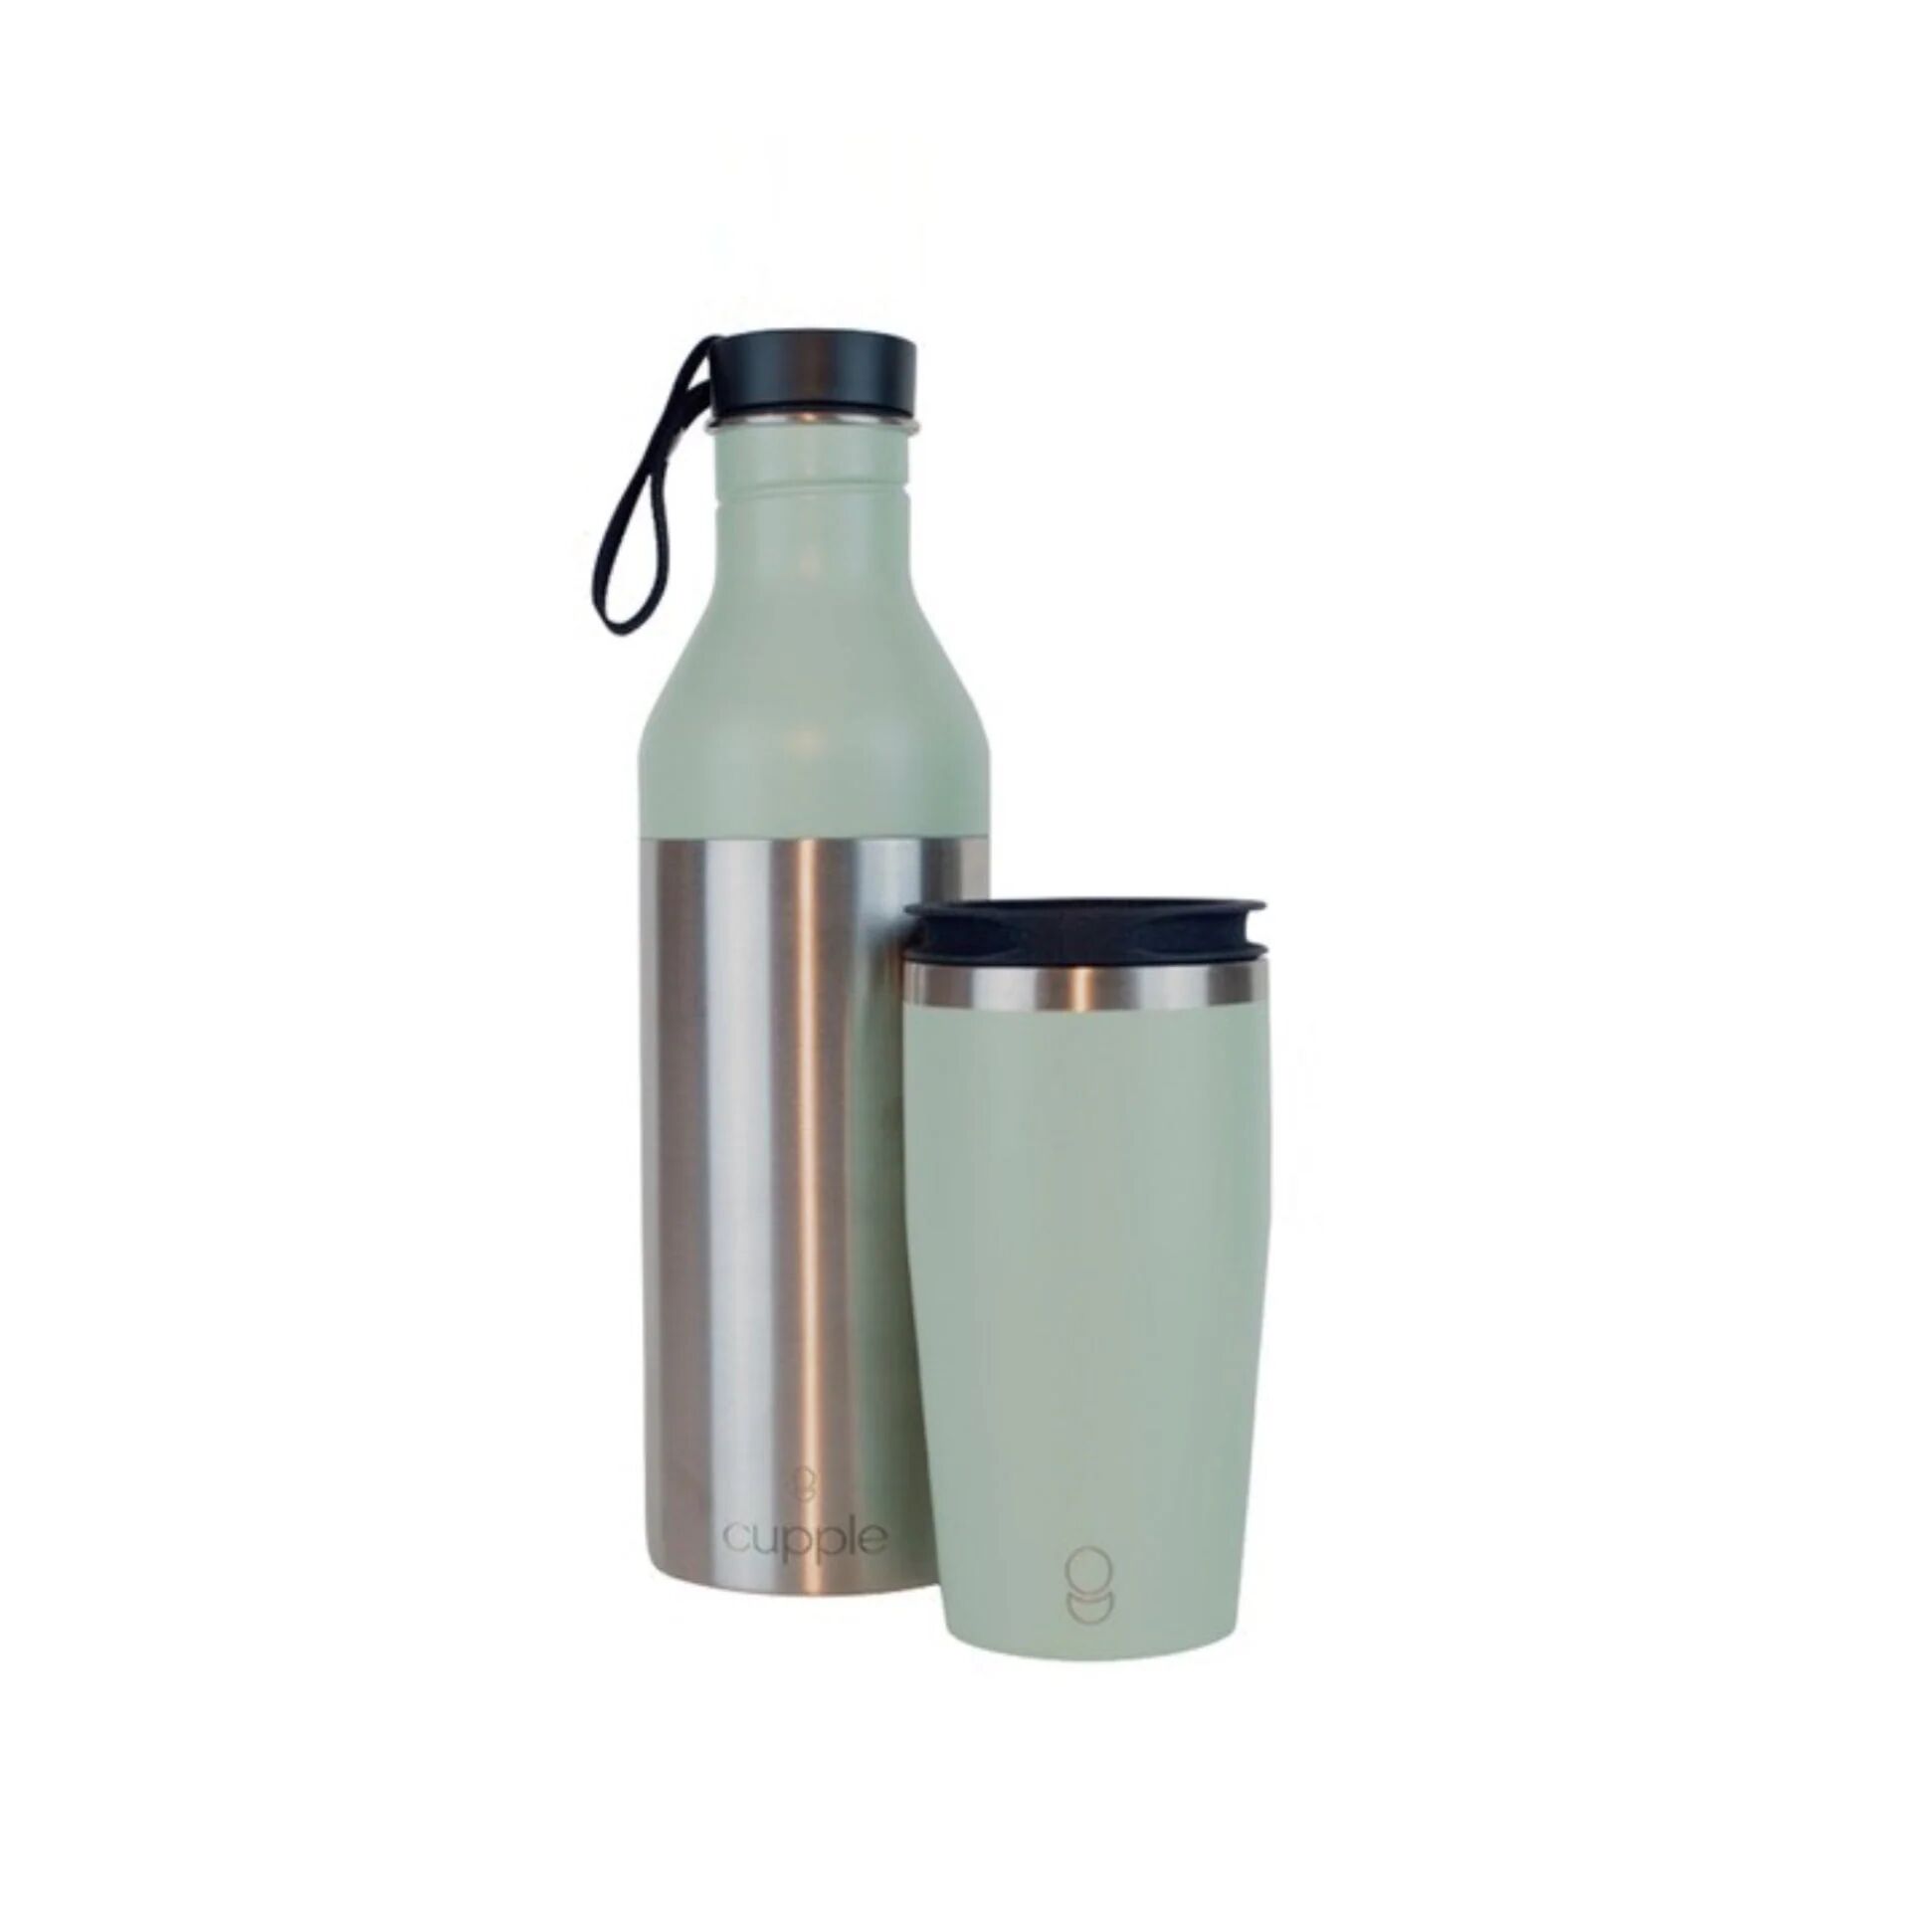 Water Bottle & Coffee Cup, Sea Green By Cupple   Colour: Sea Green